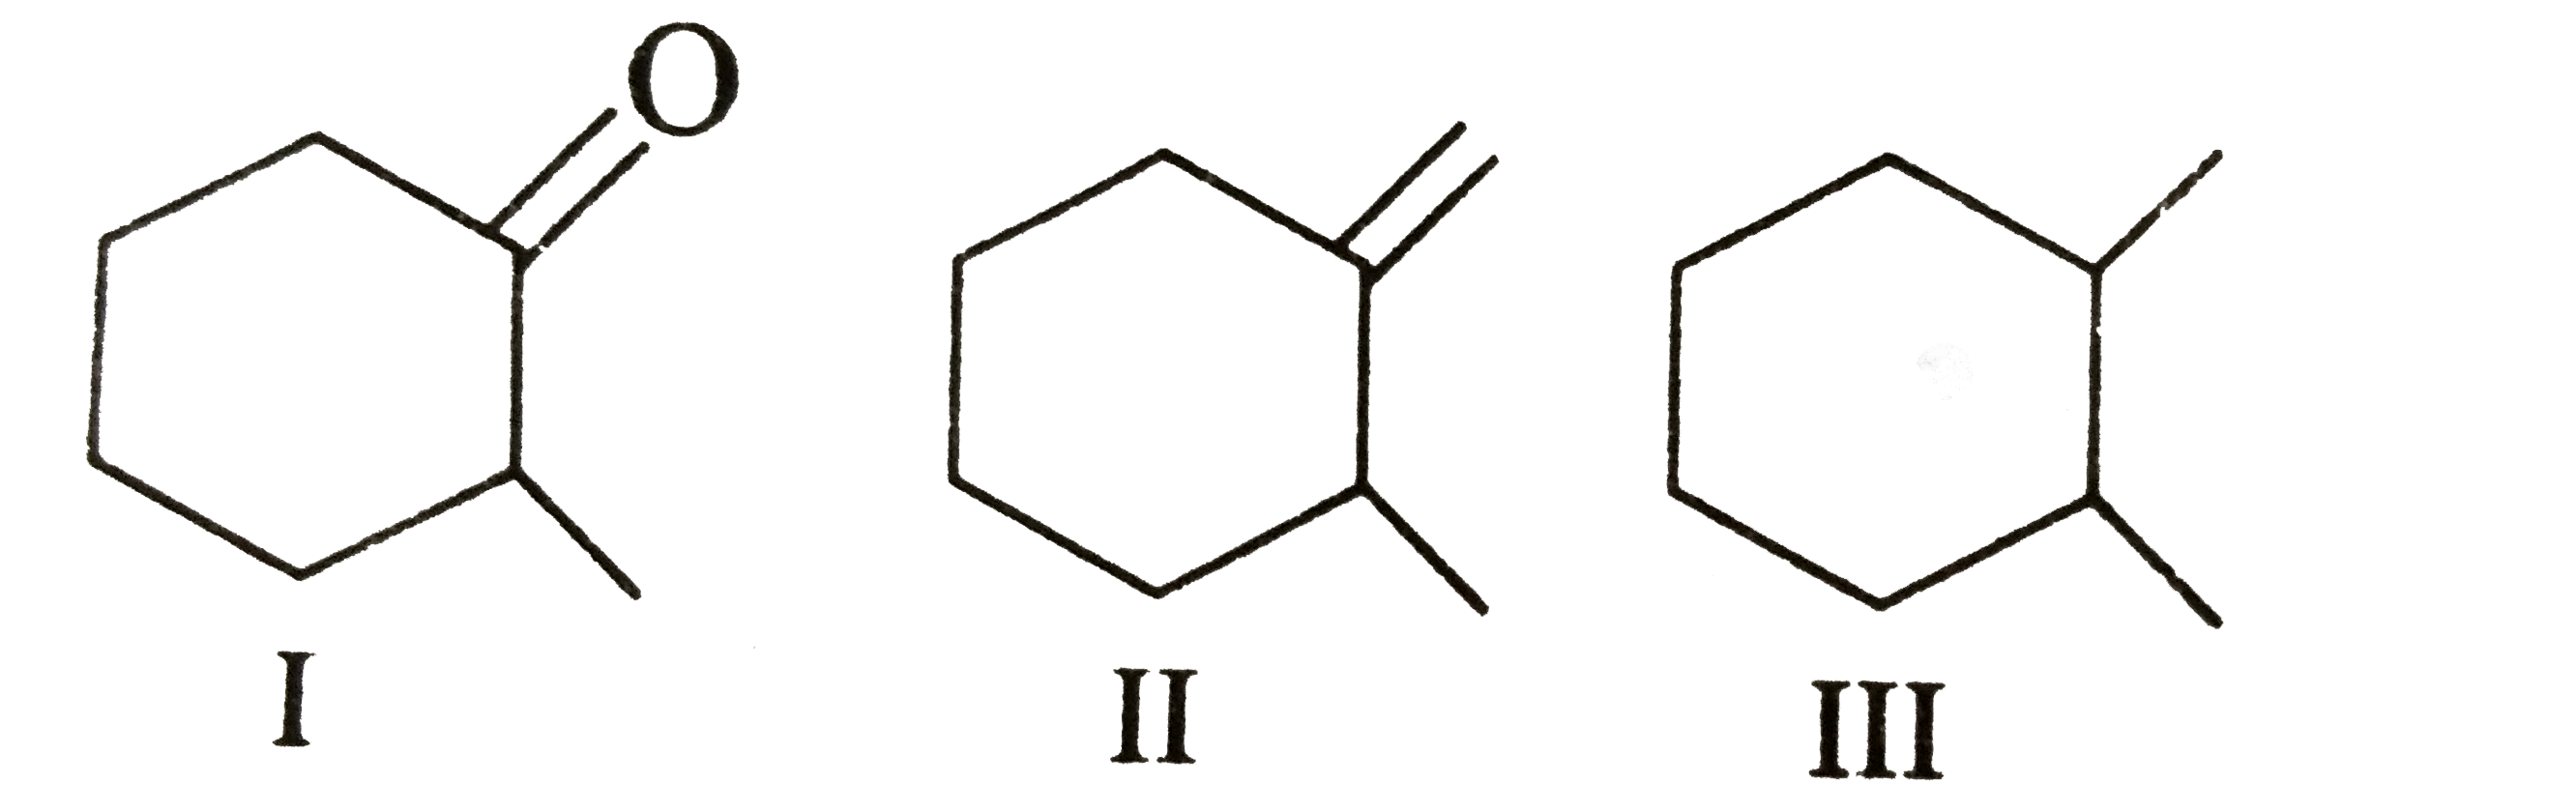 Which of these compounds will exhibit geometrical isomerism?